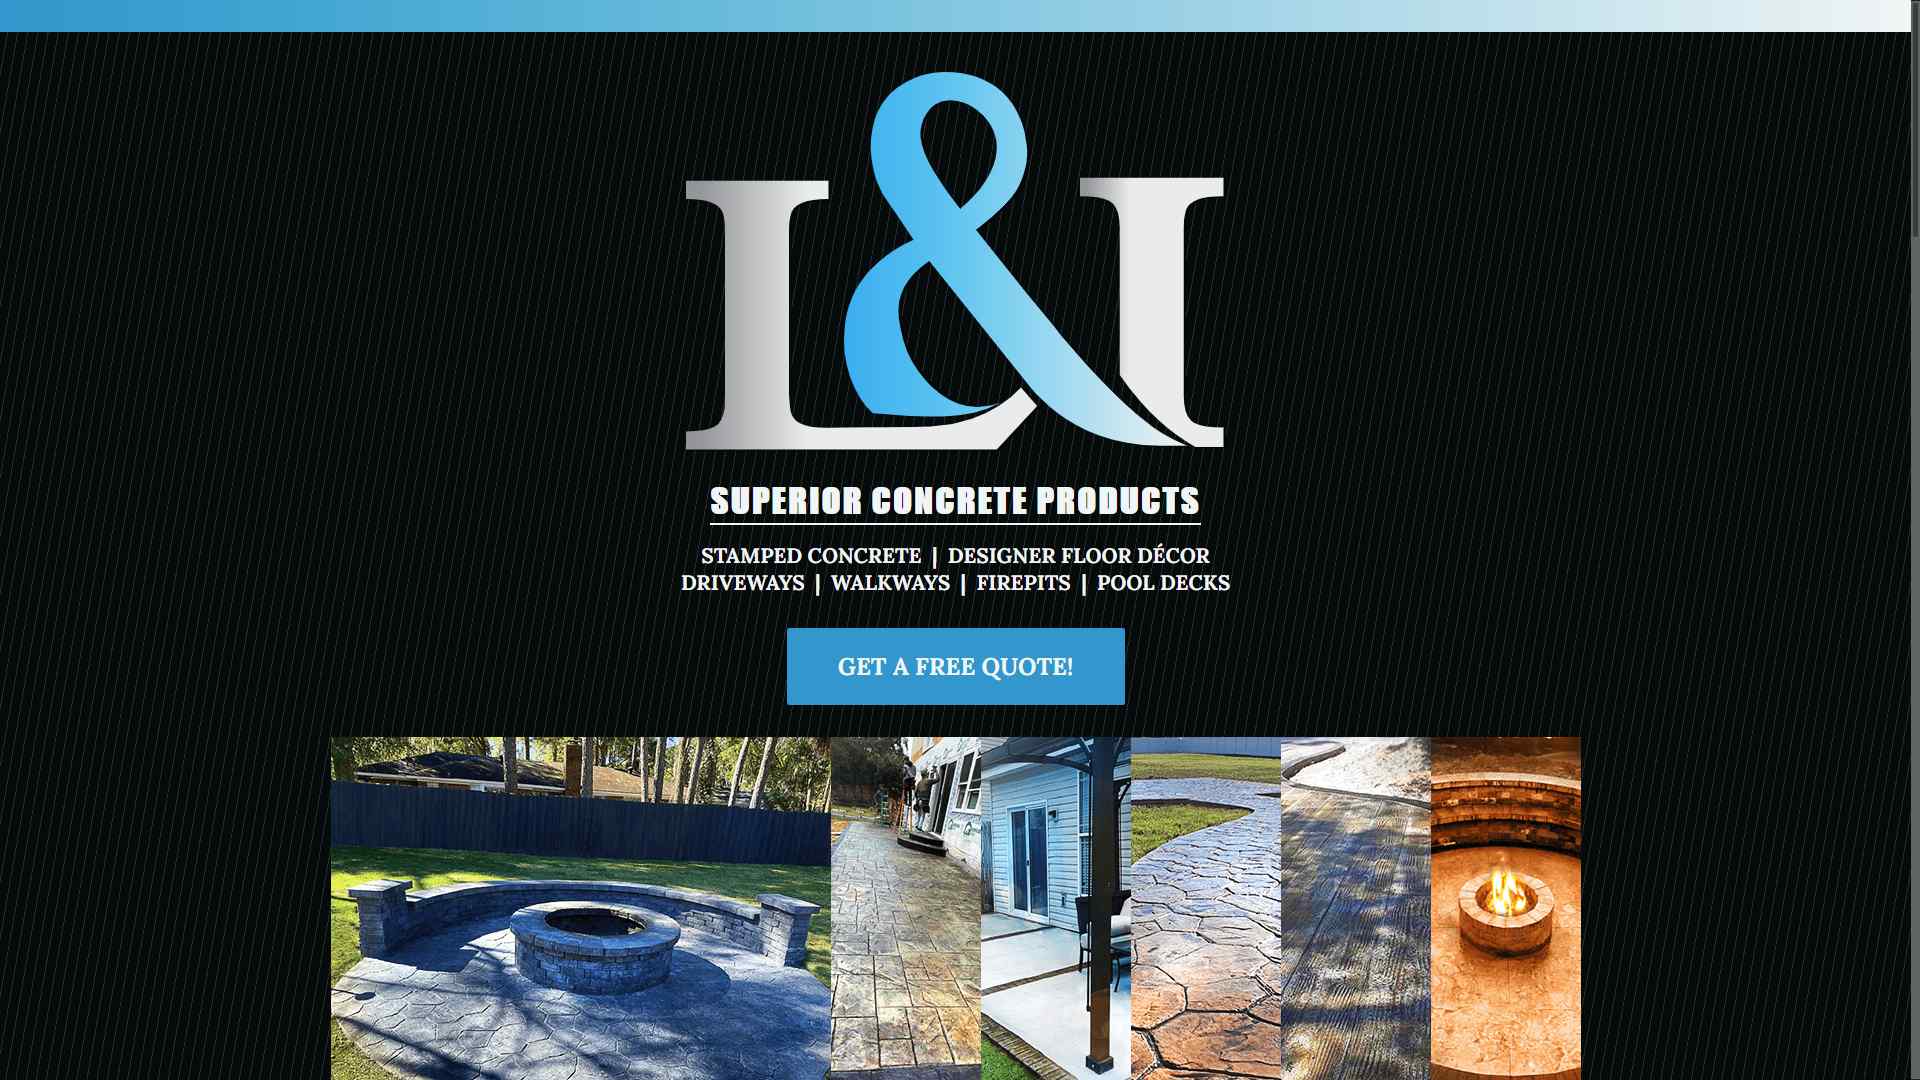 Stamped Concrete Business – One Page Website on Desktop